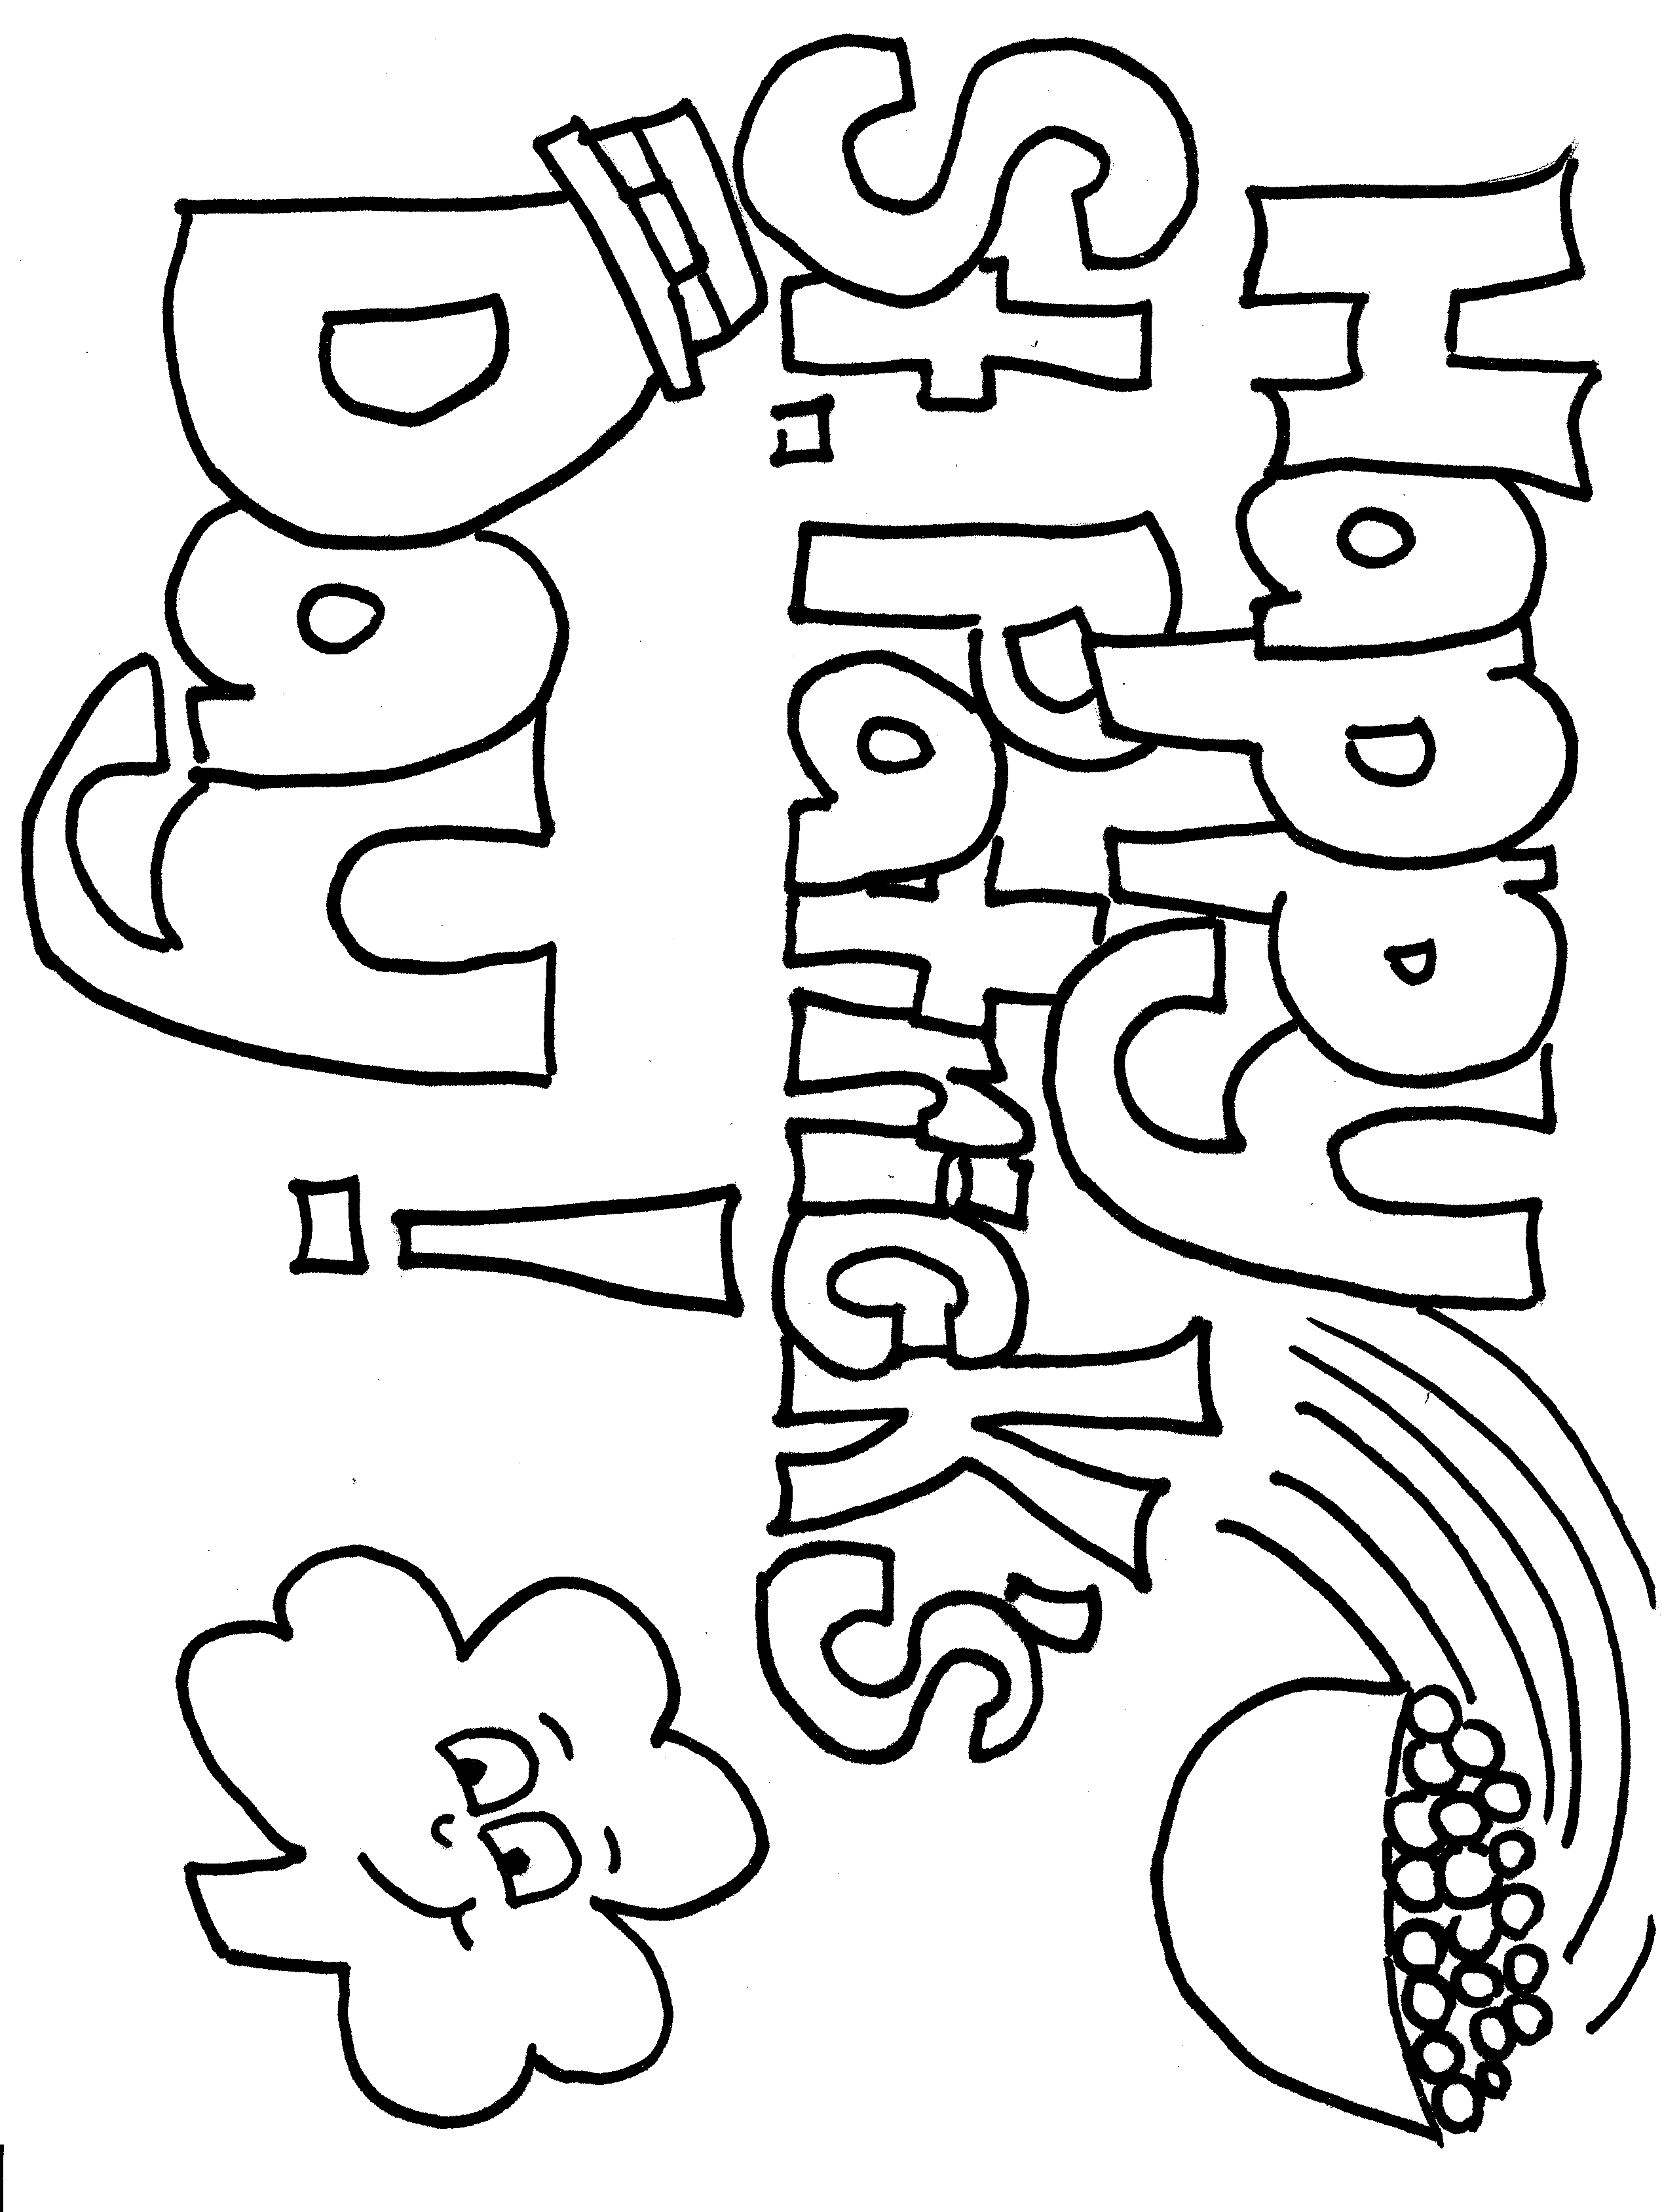 st-patricks-day-coloring-pages-dr-odd